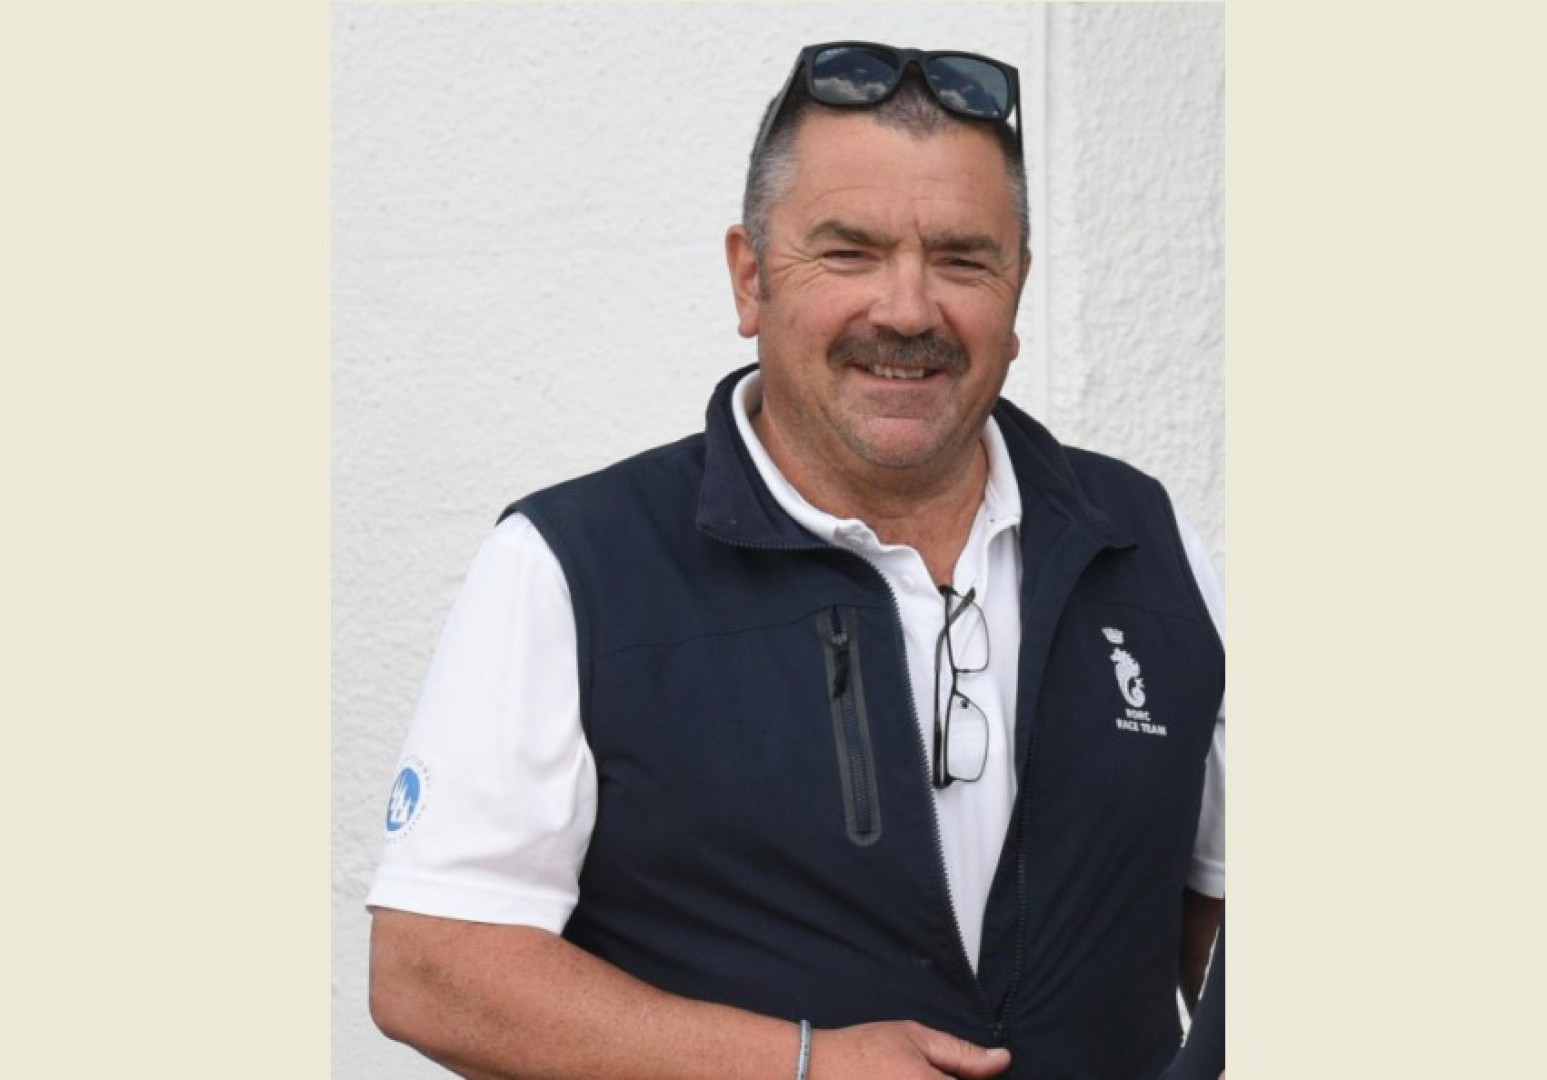 Steve Cole has been appointed the new RORC Racing Manager © Rick Tomlinson